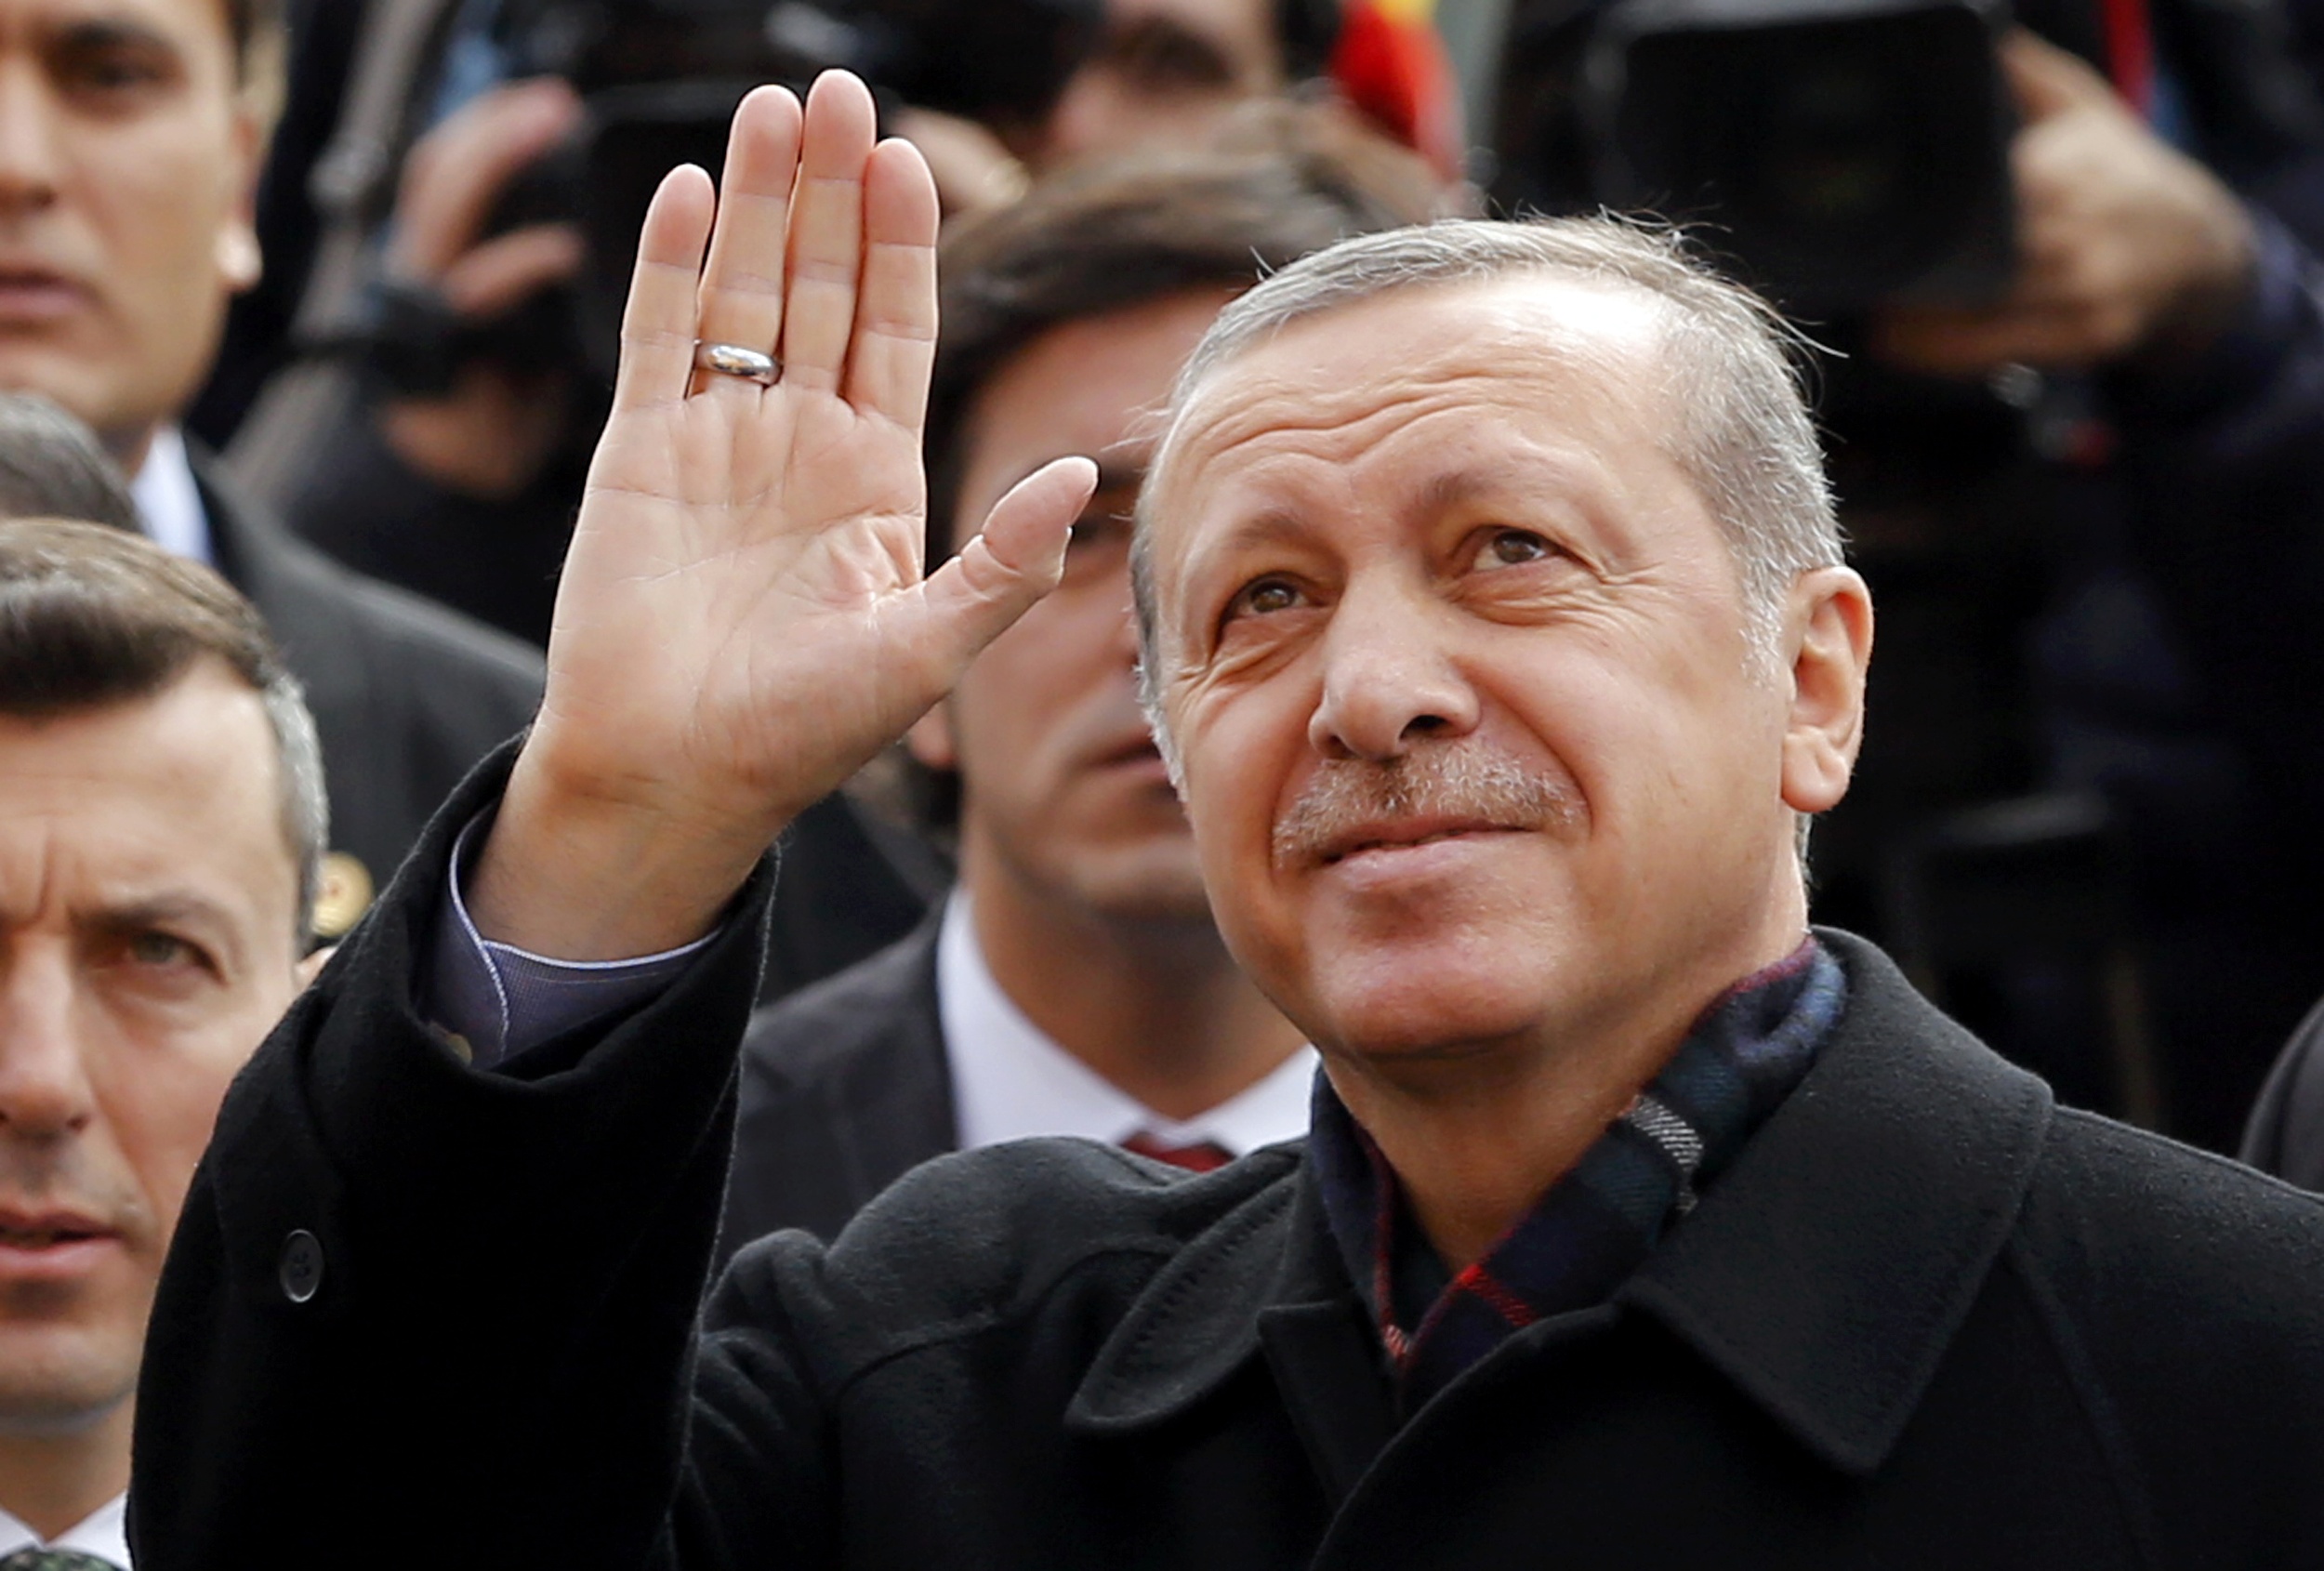 Turkish President Tayyip Erdogan greets his supporters as he leaves from a polling station in Istanbul, Turkey November 1, 2015. Turks began voting on Sunday amid worsening security and economic worries in a snap parliamentary election that could profoundly impact the divided country's trajectory and that of President Tayyip Erdogan. The parliamentary poll is the second in five months, after the ruling AK Party founded by Erdogan failed to retain its single-party majority in June. REUTERS/Murad Sezer TPX IMAGES OF THE DAY